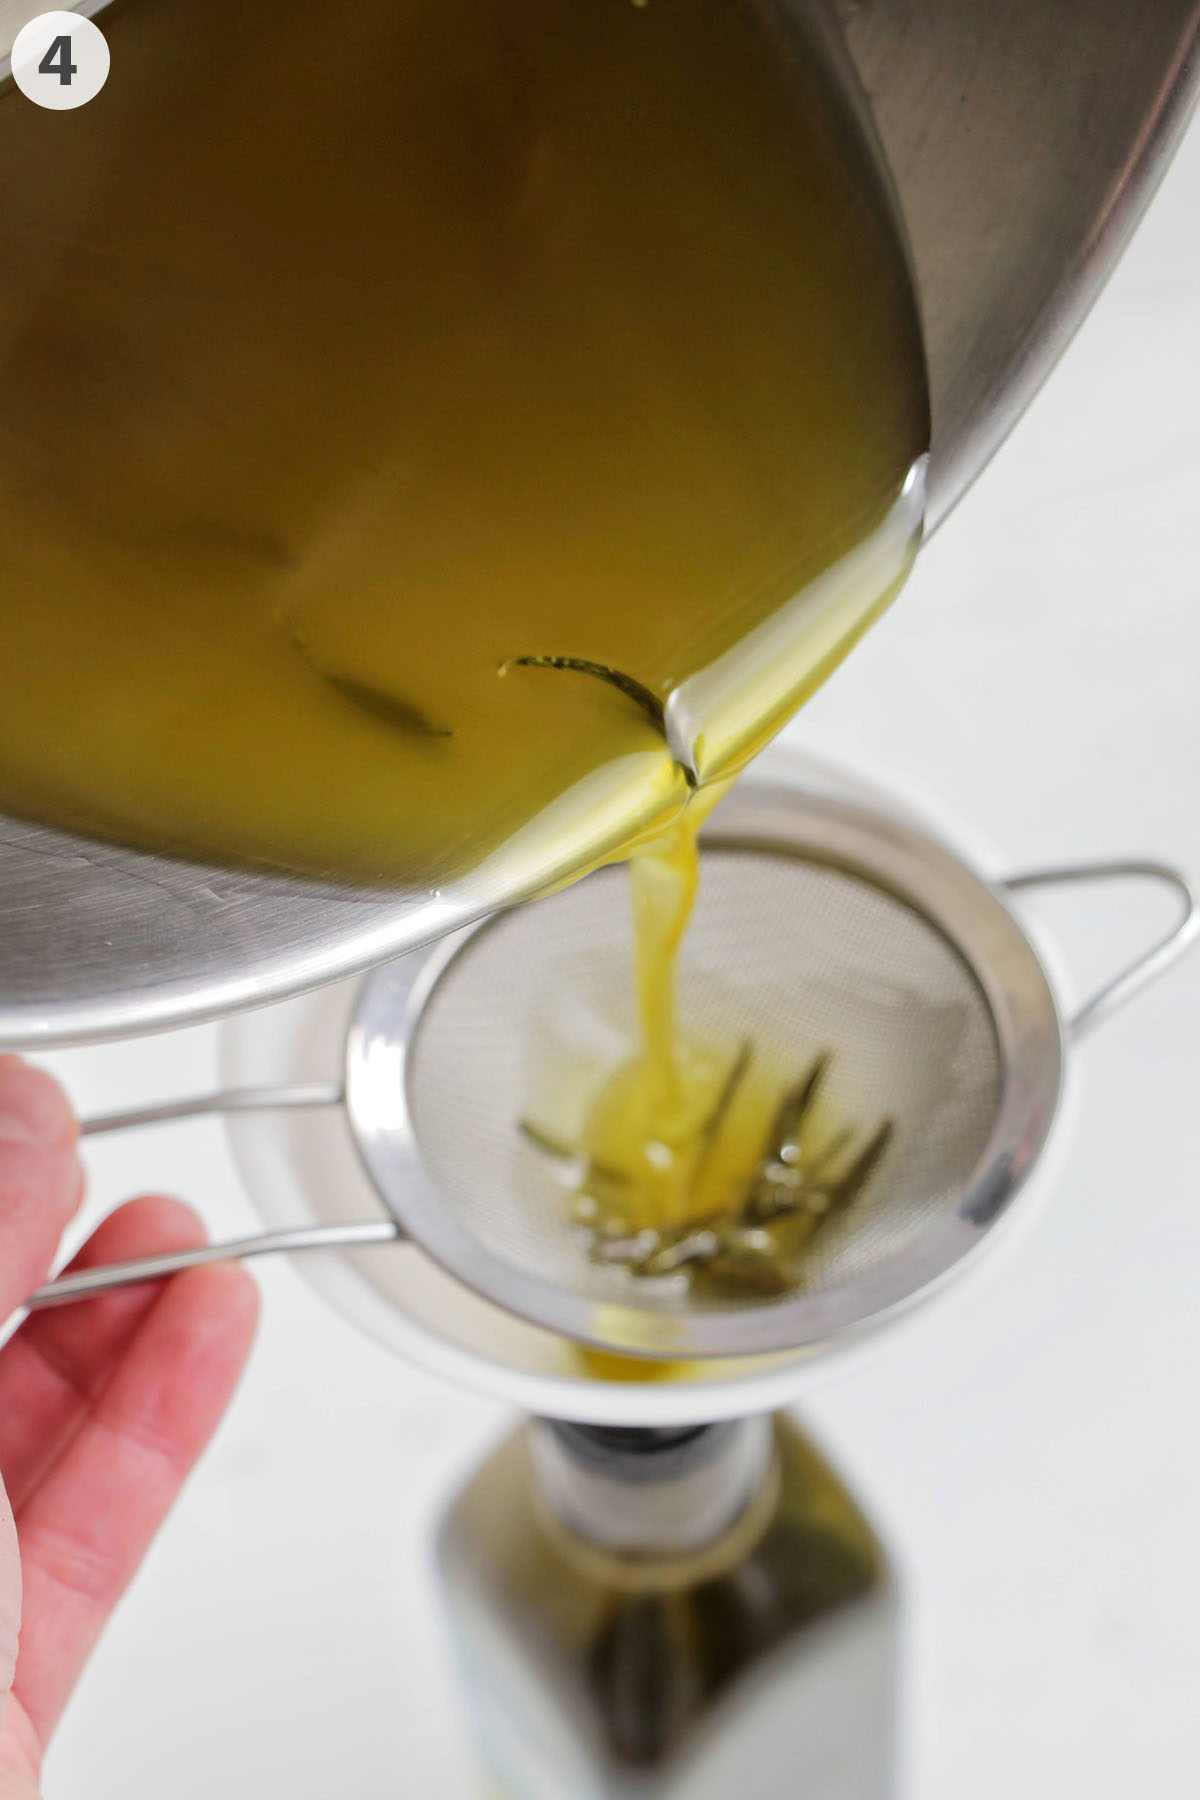 numbered photo straining rosemary olive oil into a bottle.